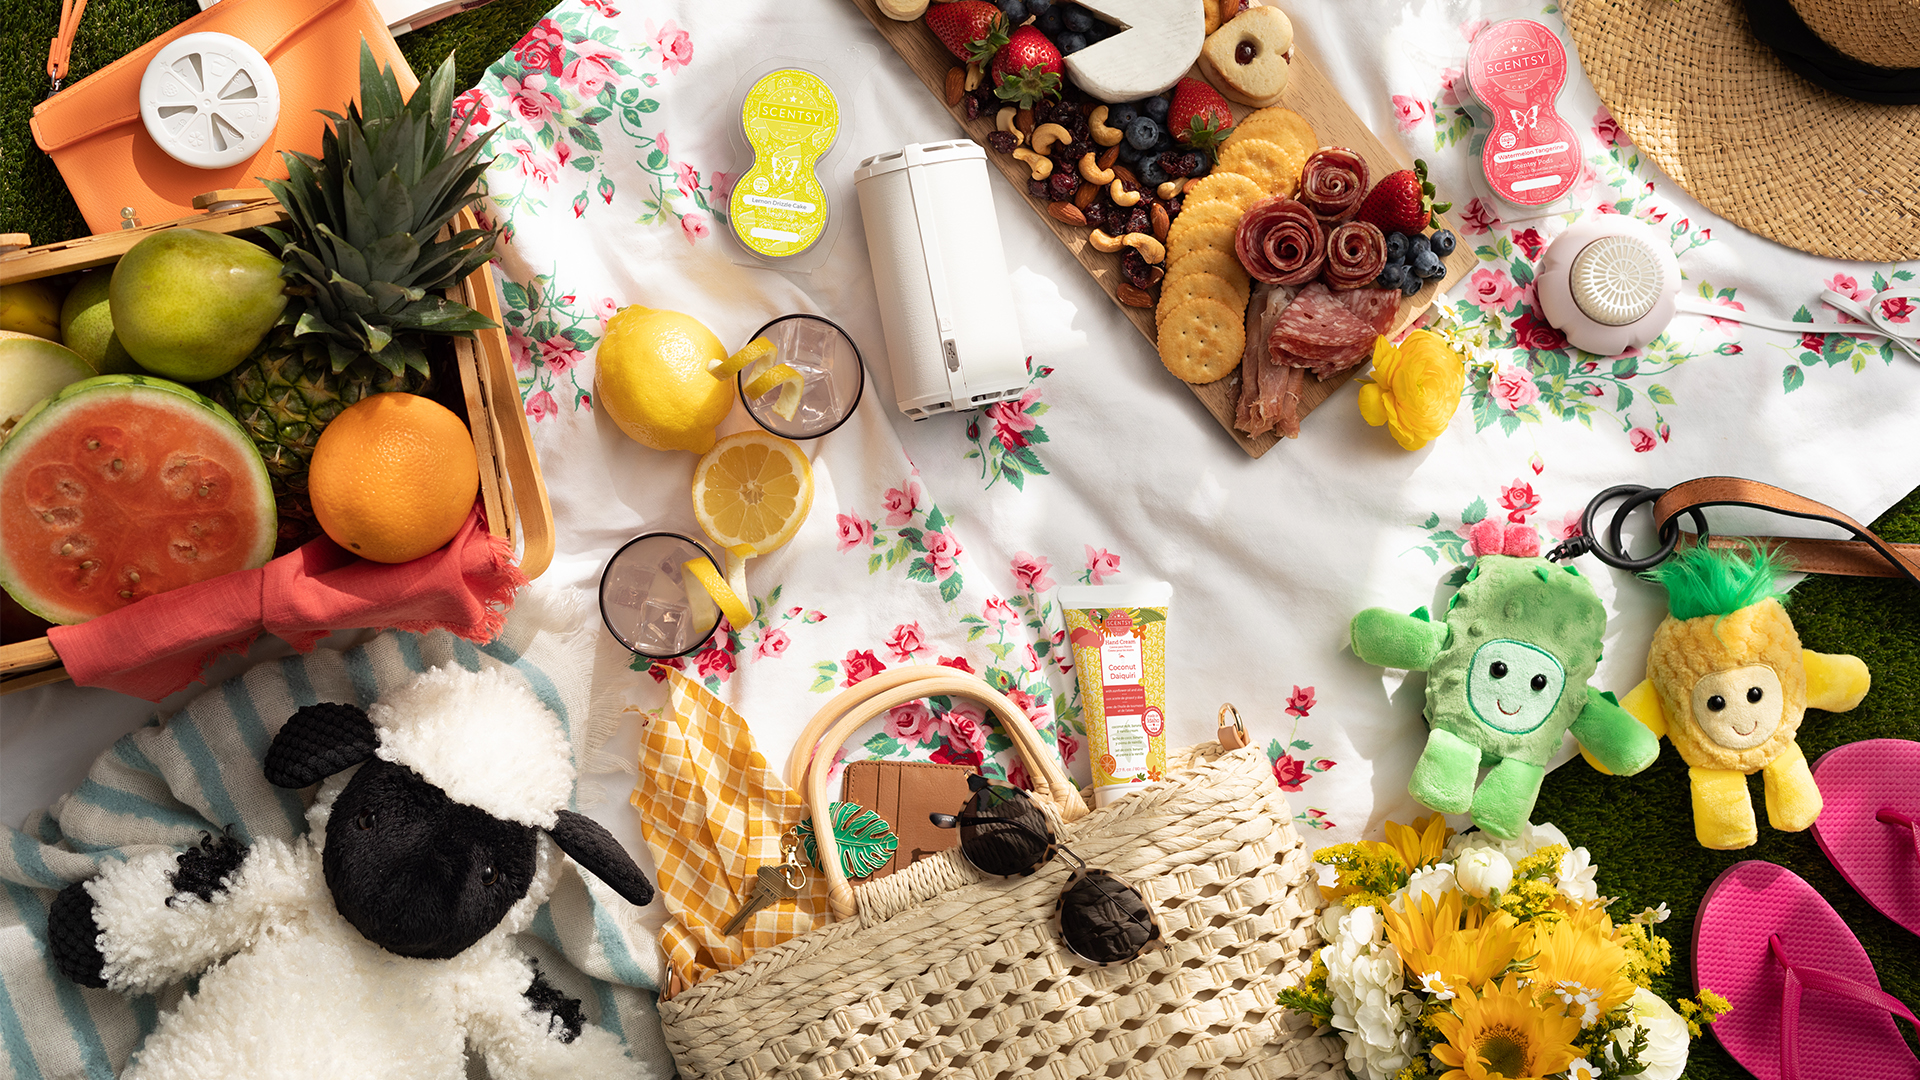 Summer picnic full of scentsy portable scent products, fruits and a charcuterie board on a floral white linen